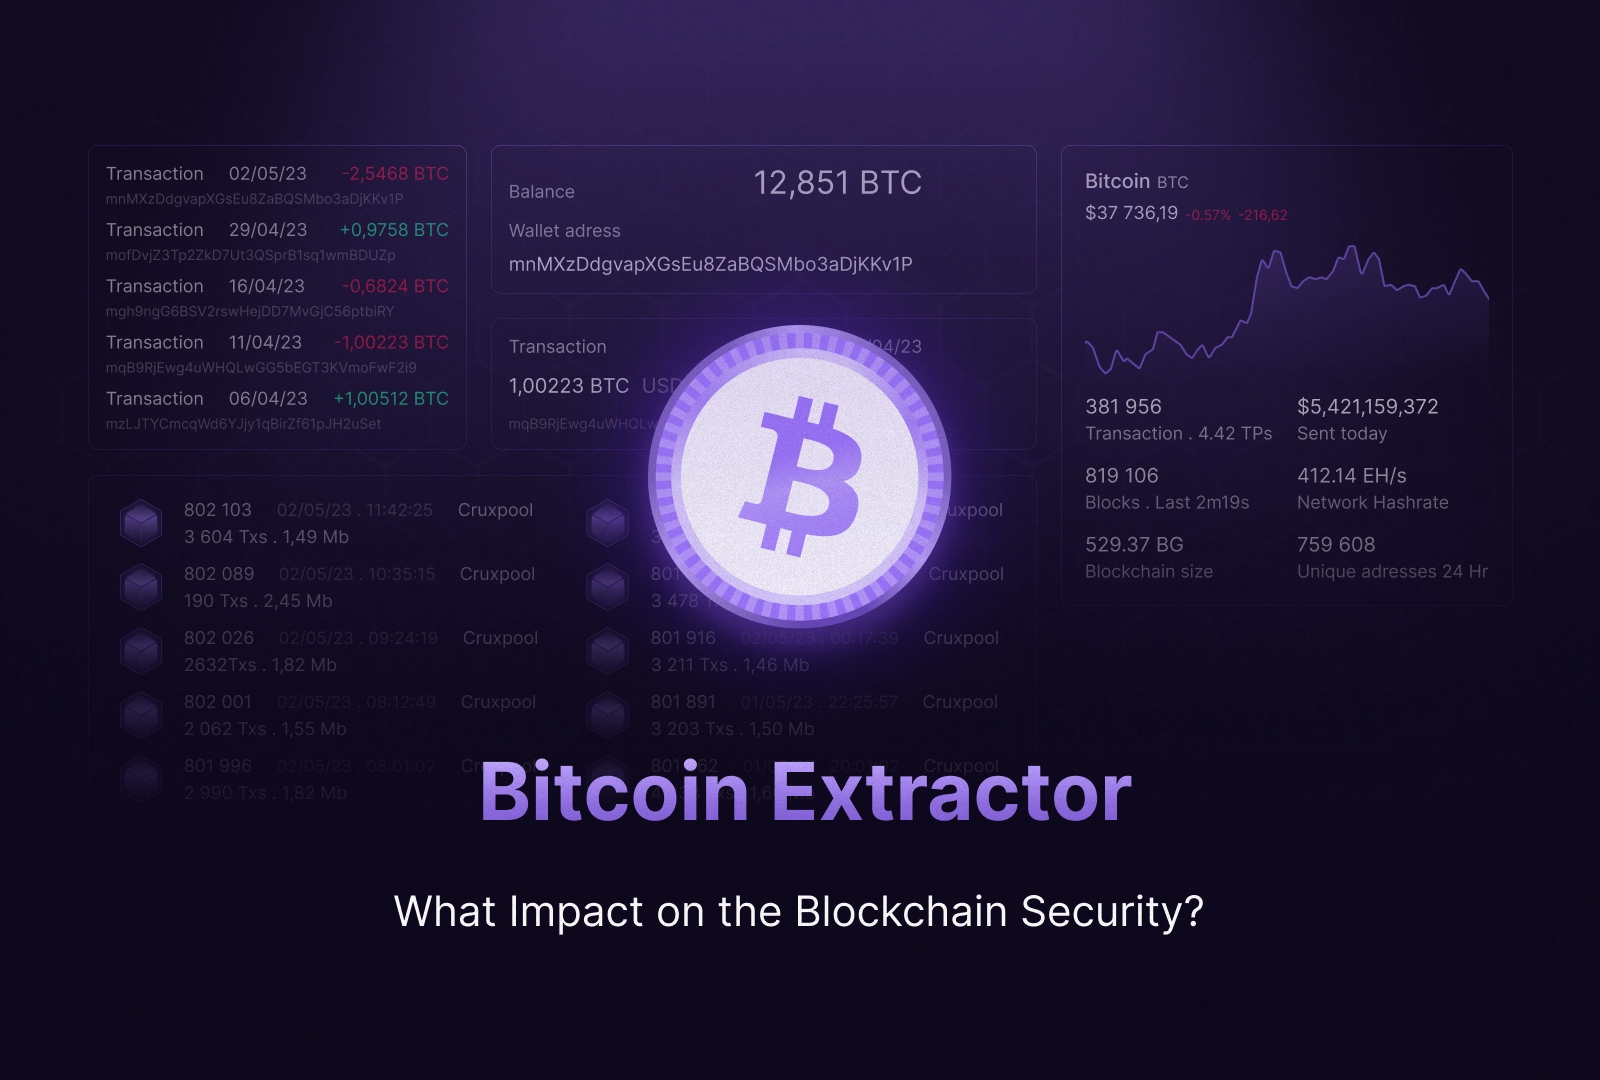 What is a Bitcoin Extractor